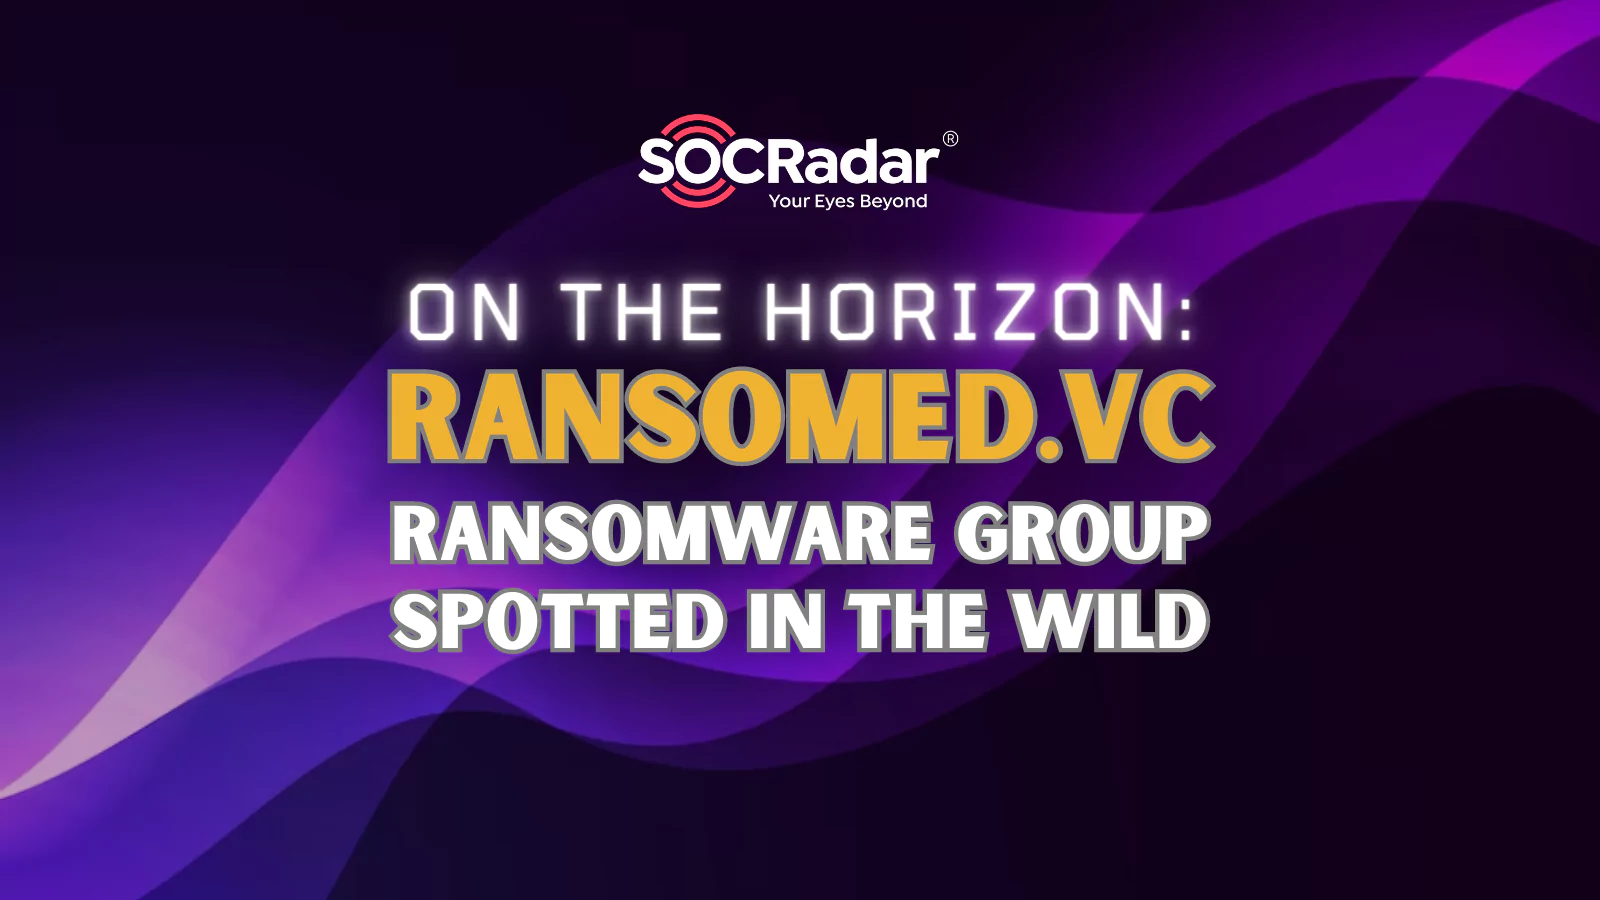 SOCRadar® Cyber Intelligence Inc. | On the Horizon: Ransomed.vc Ransomware Group Spotted in the Wild